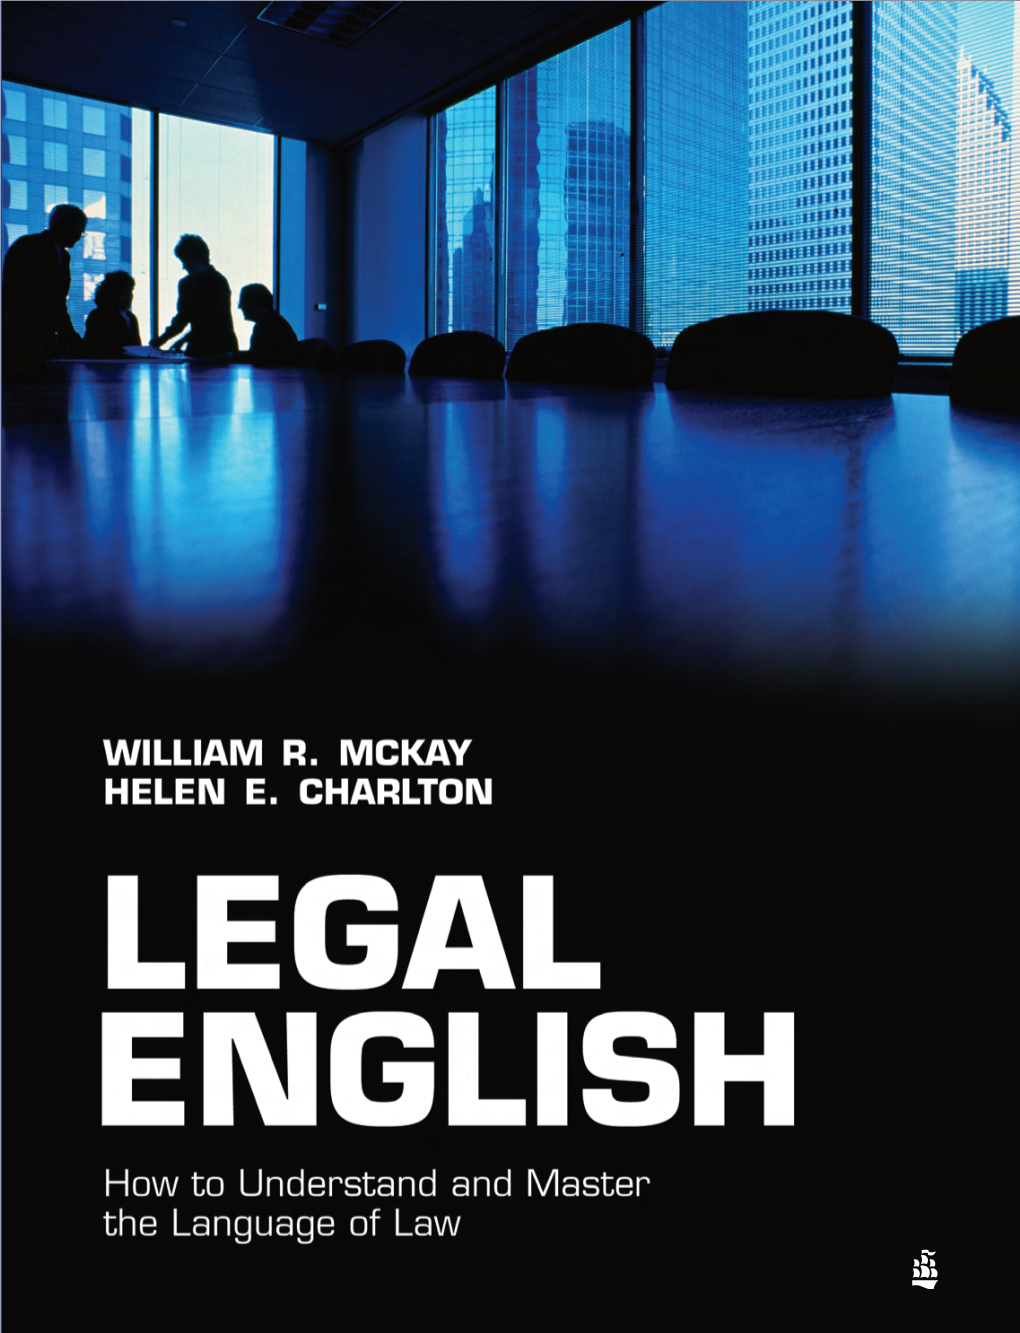 LEGAL ENGLISH MCKAY and CHARLTON LEGAL ENGLISH How to Understand and Master the Language of Law